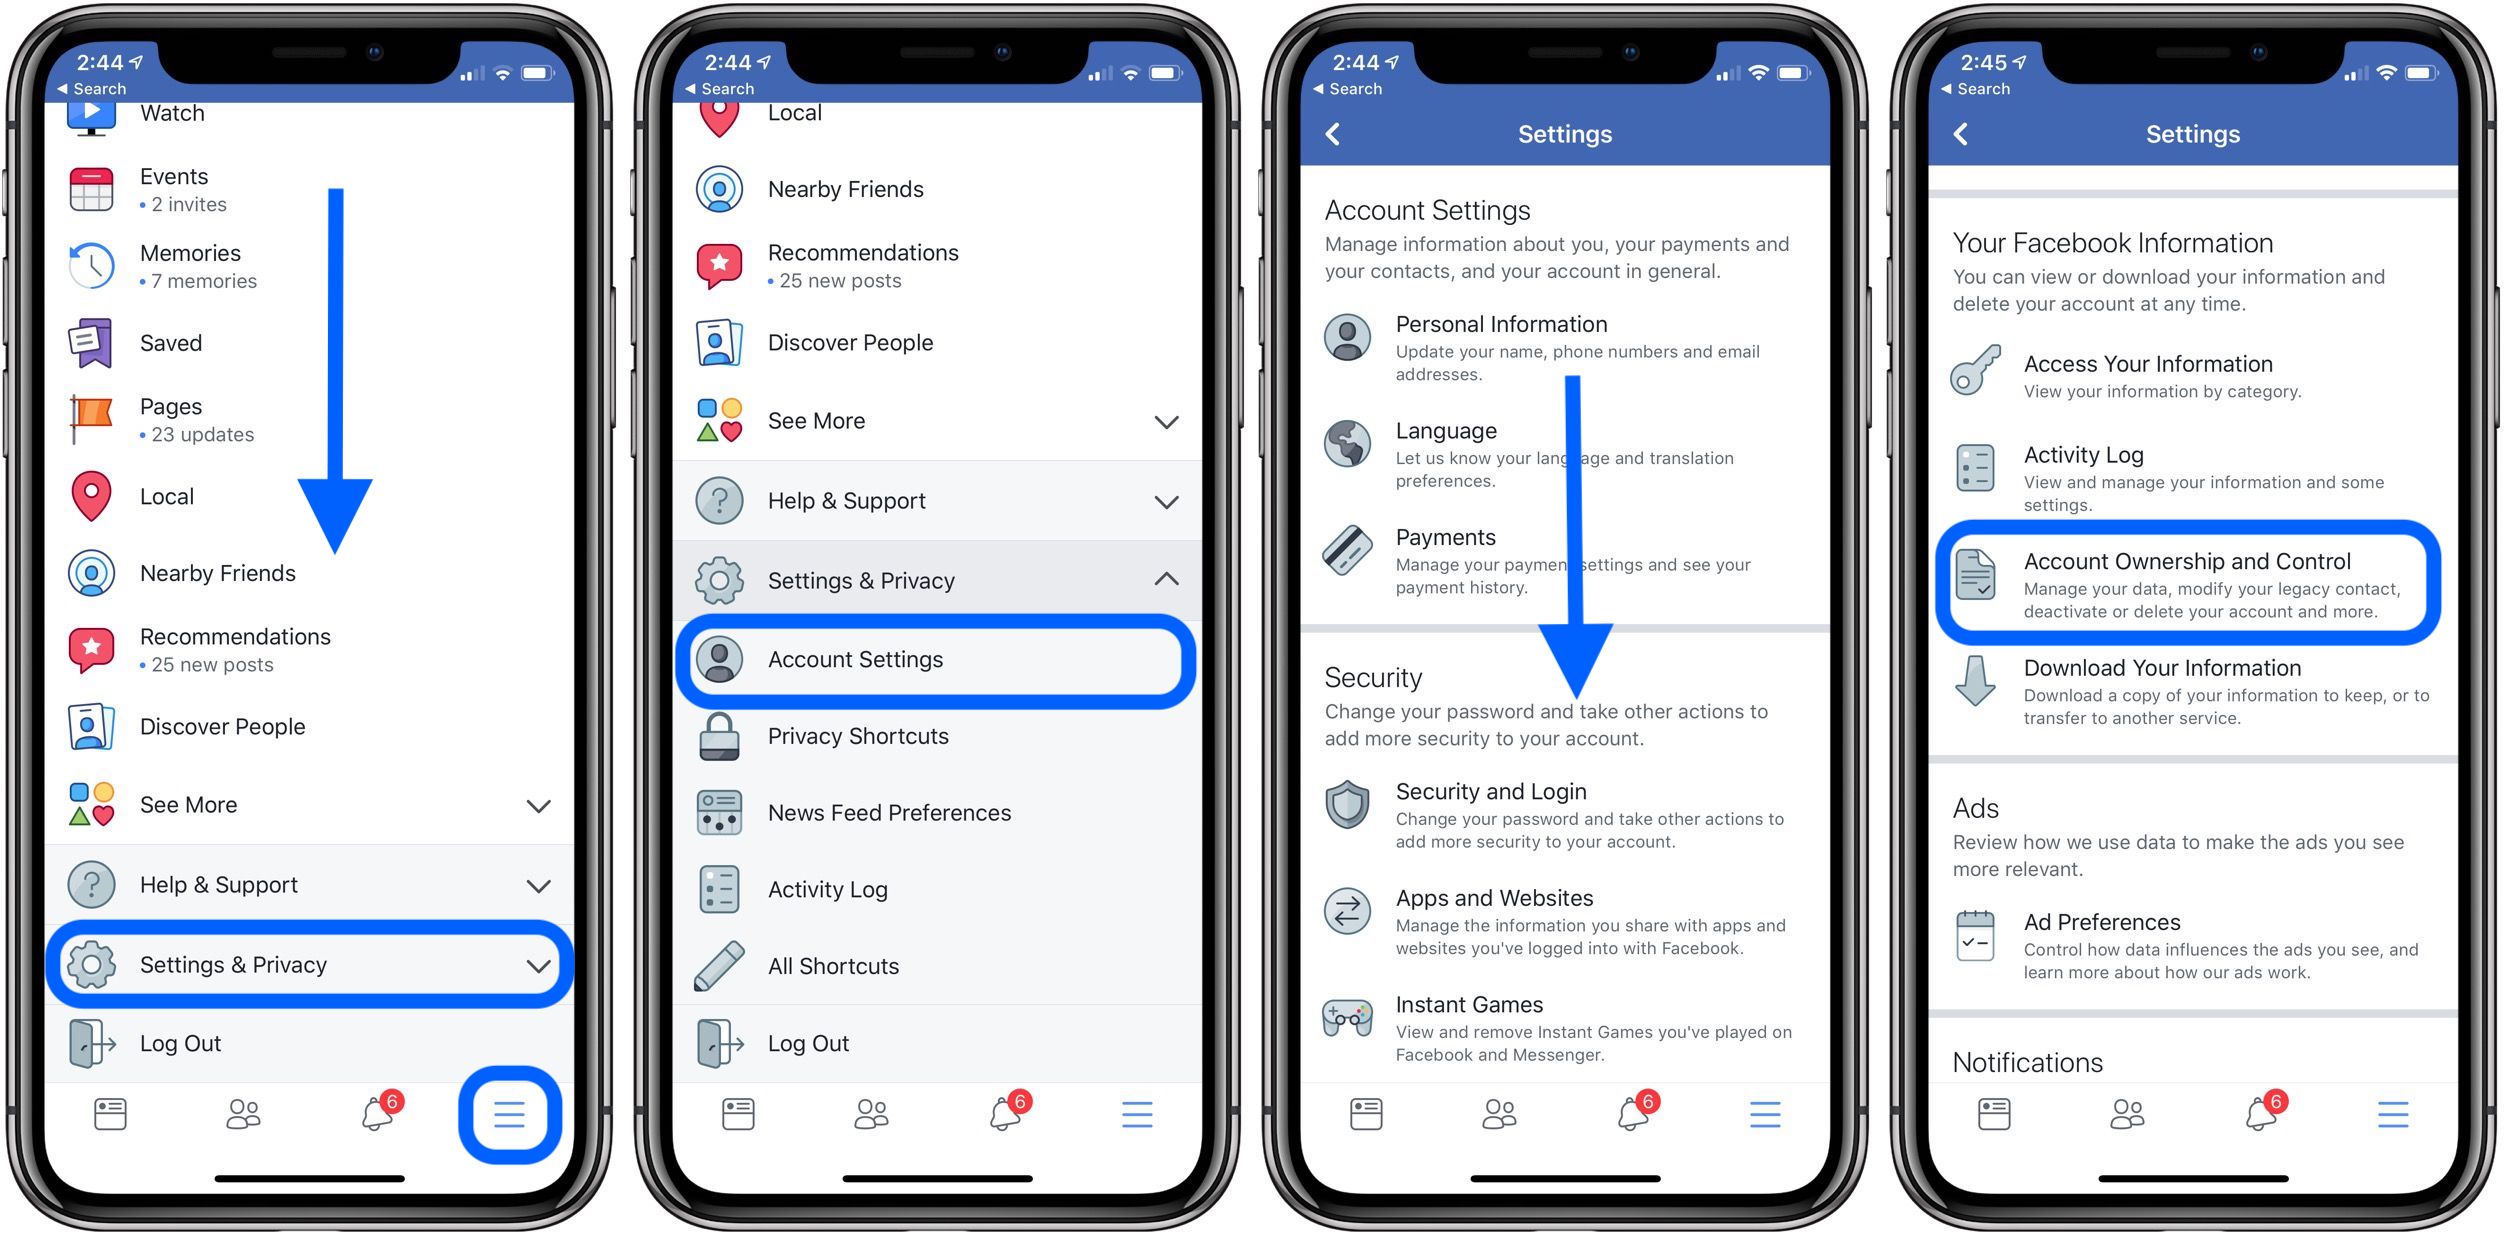 how to deactivate facebook account on app